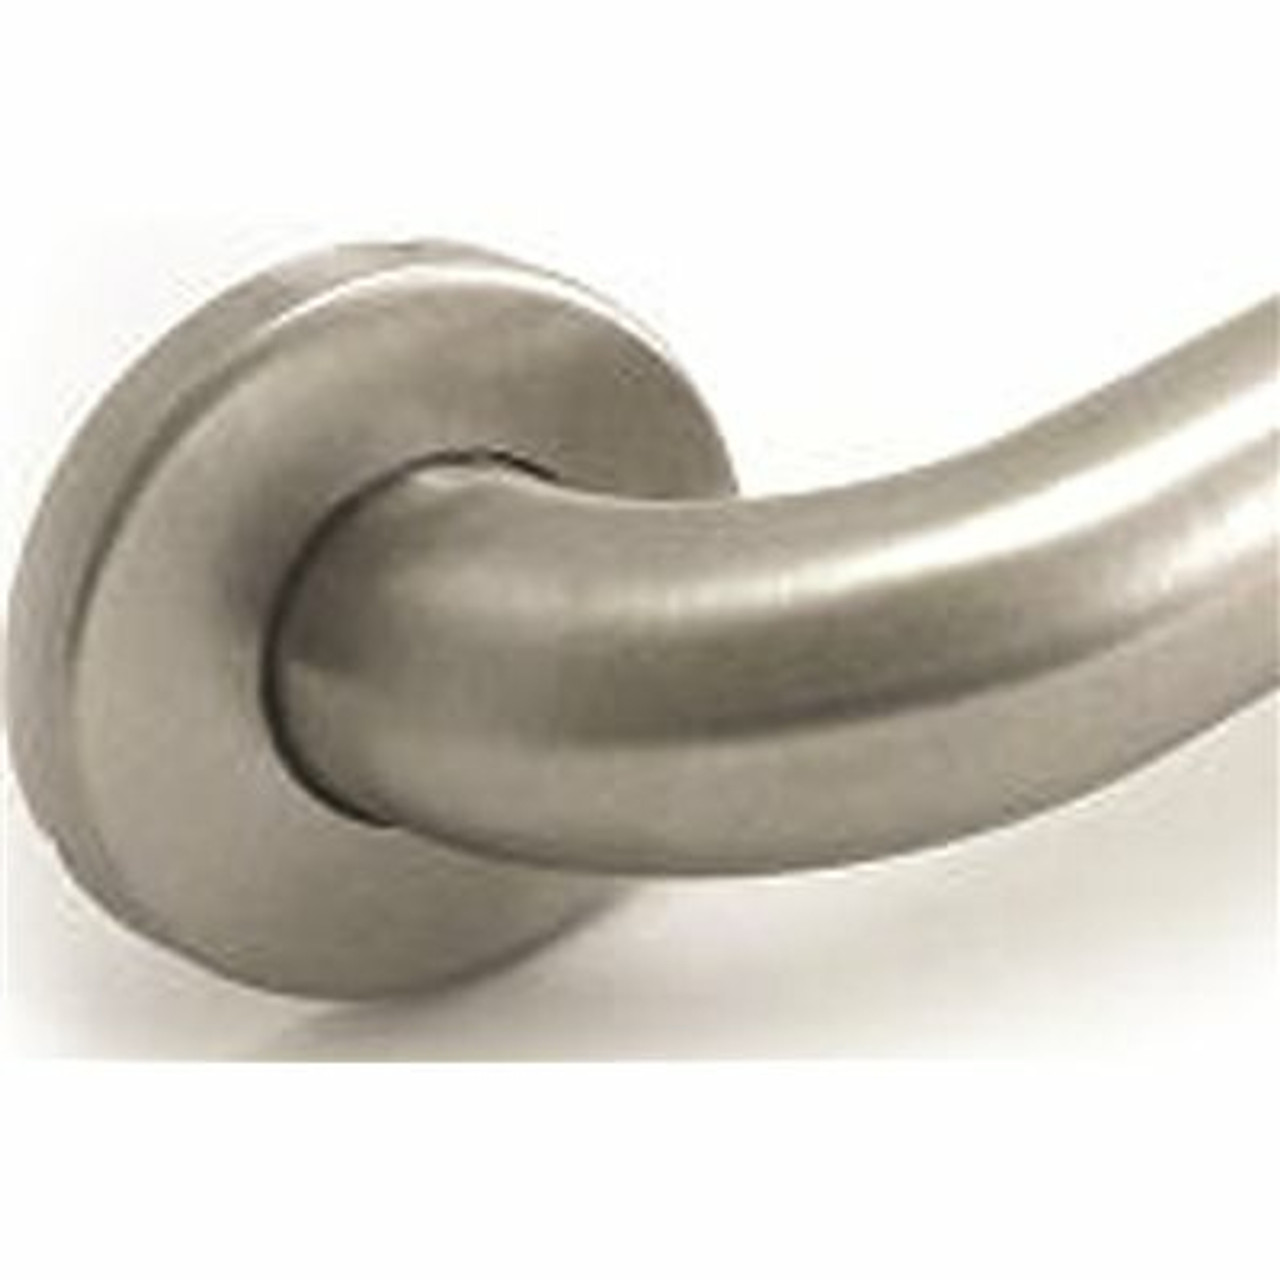 Wingits Premium Series 48 In. X 1.5 In. Grab Bar In Satin Stainless Steel (51 In. Overall Length)